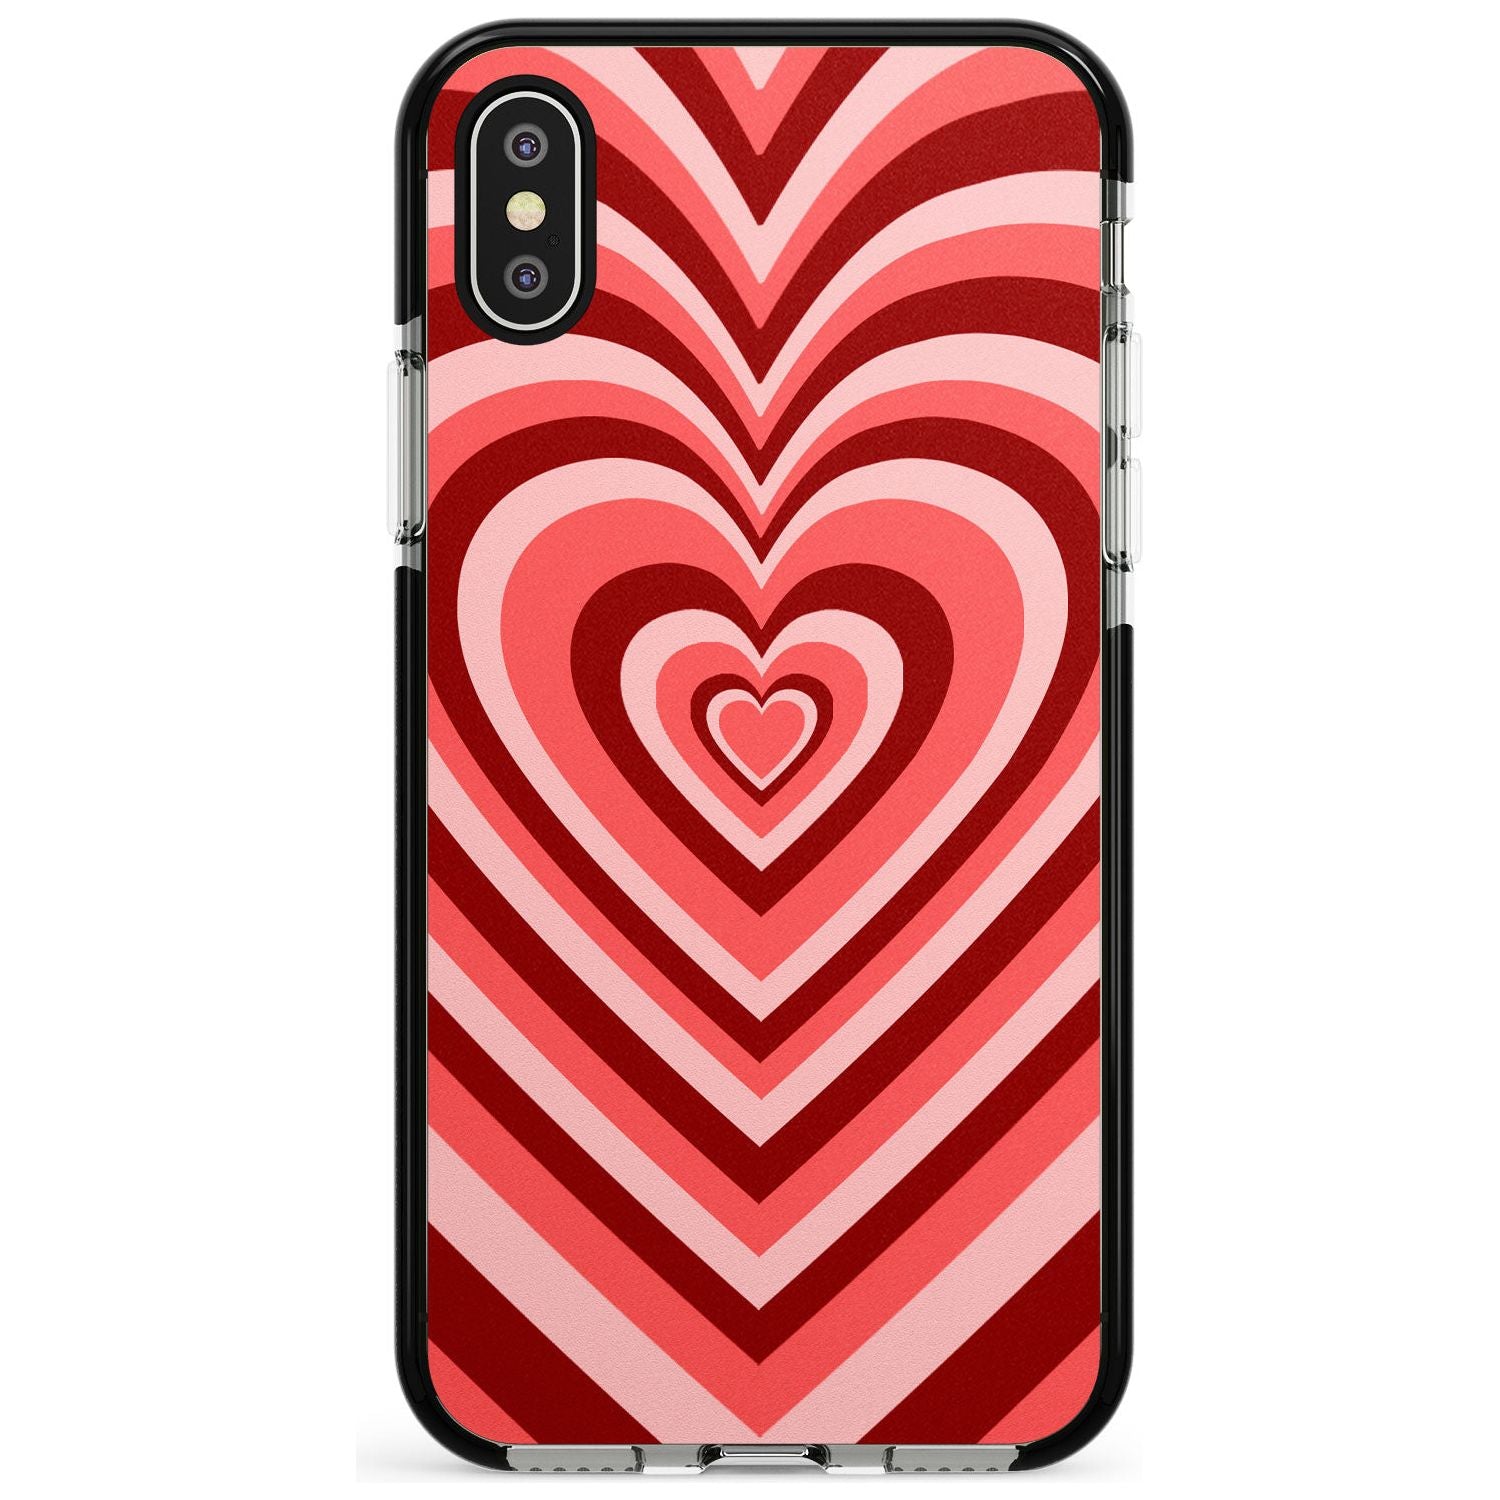 Red Heart Illusion Black Impact Phone Case for iPhone X XS Max XR